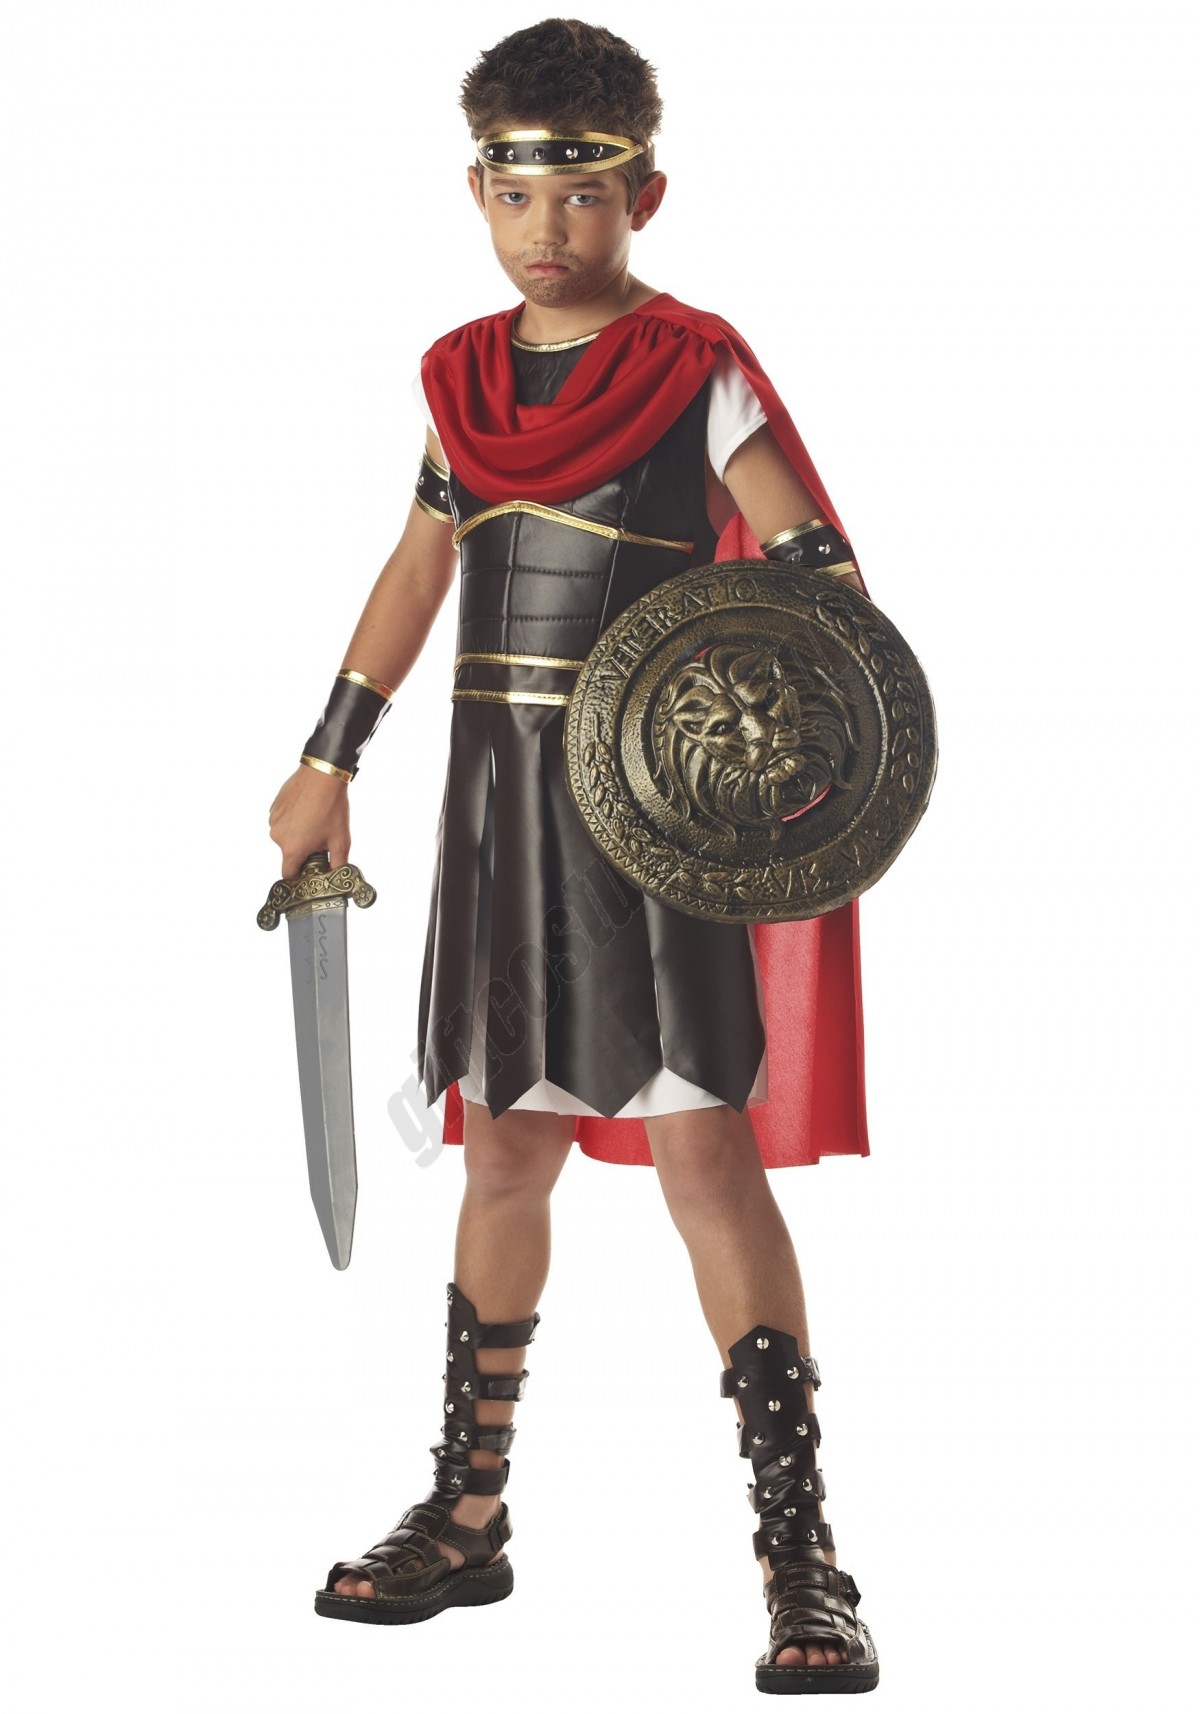 Hercules Costume for Boys Promotions - -0